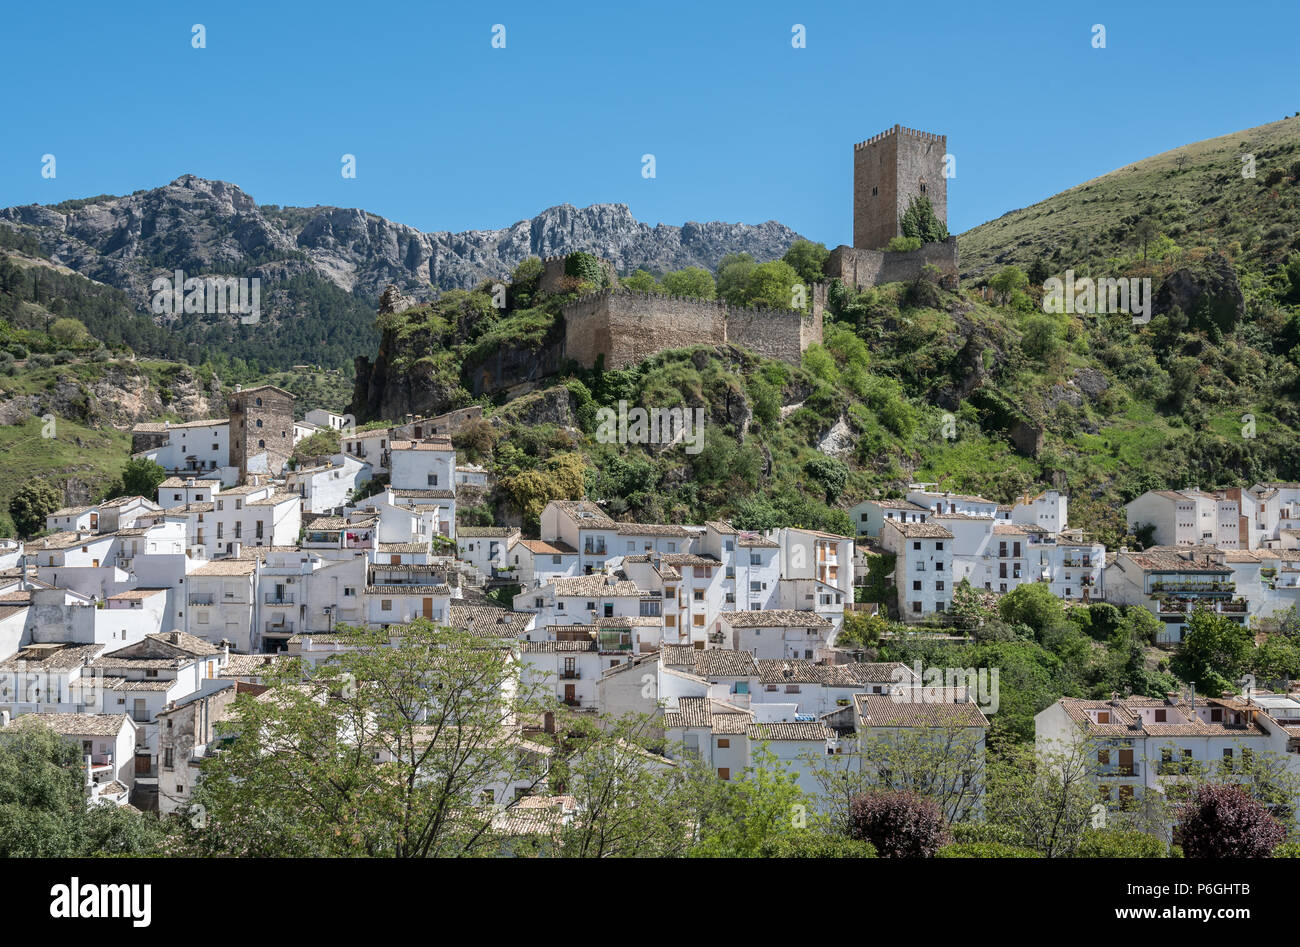 Picturesque town Cazorla with moorish fortress tower La Yerda and typical white houses surrounded by mountain range Sierra de Cazorla. Andalusia, Spai Stock Photo